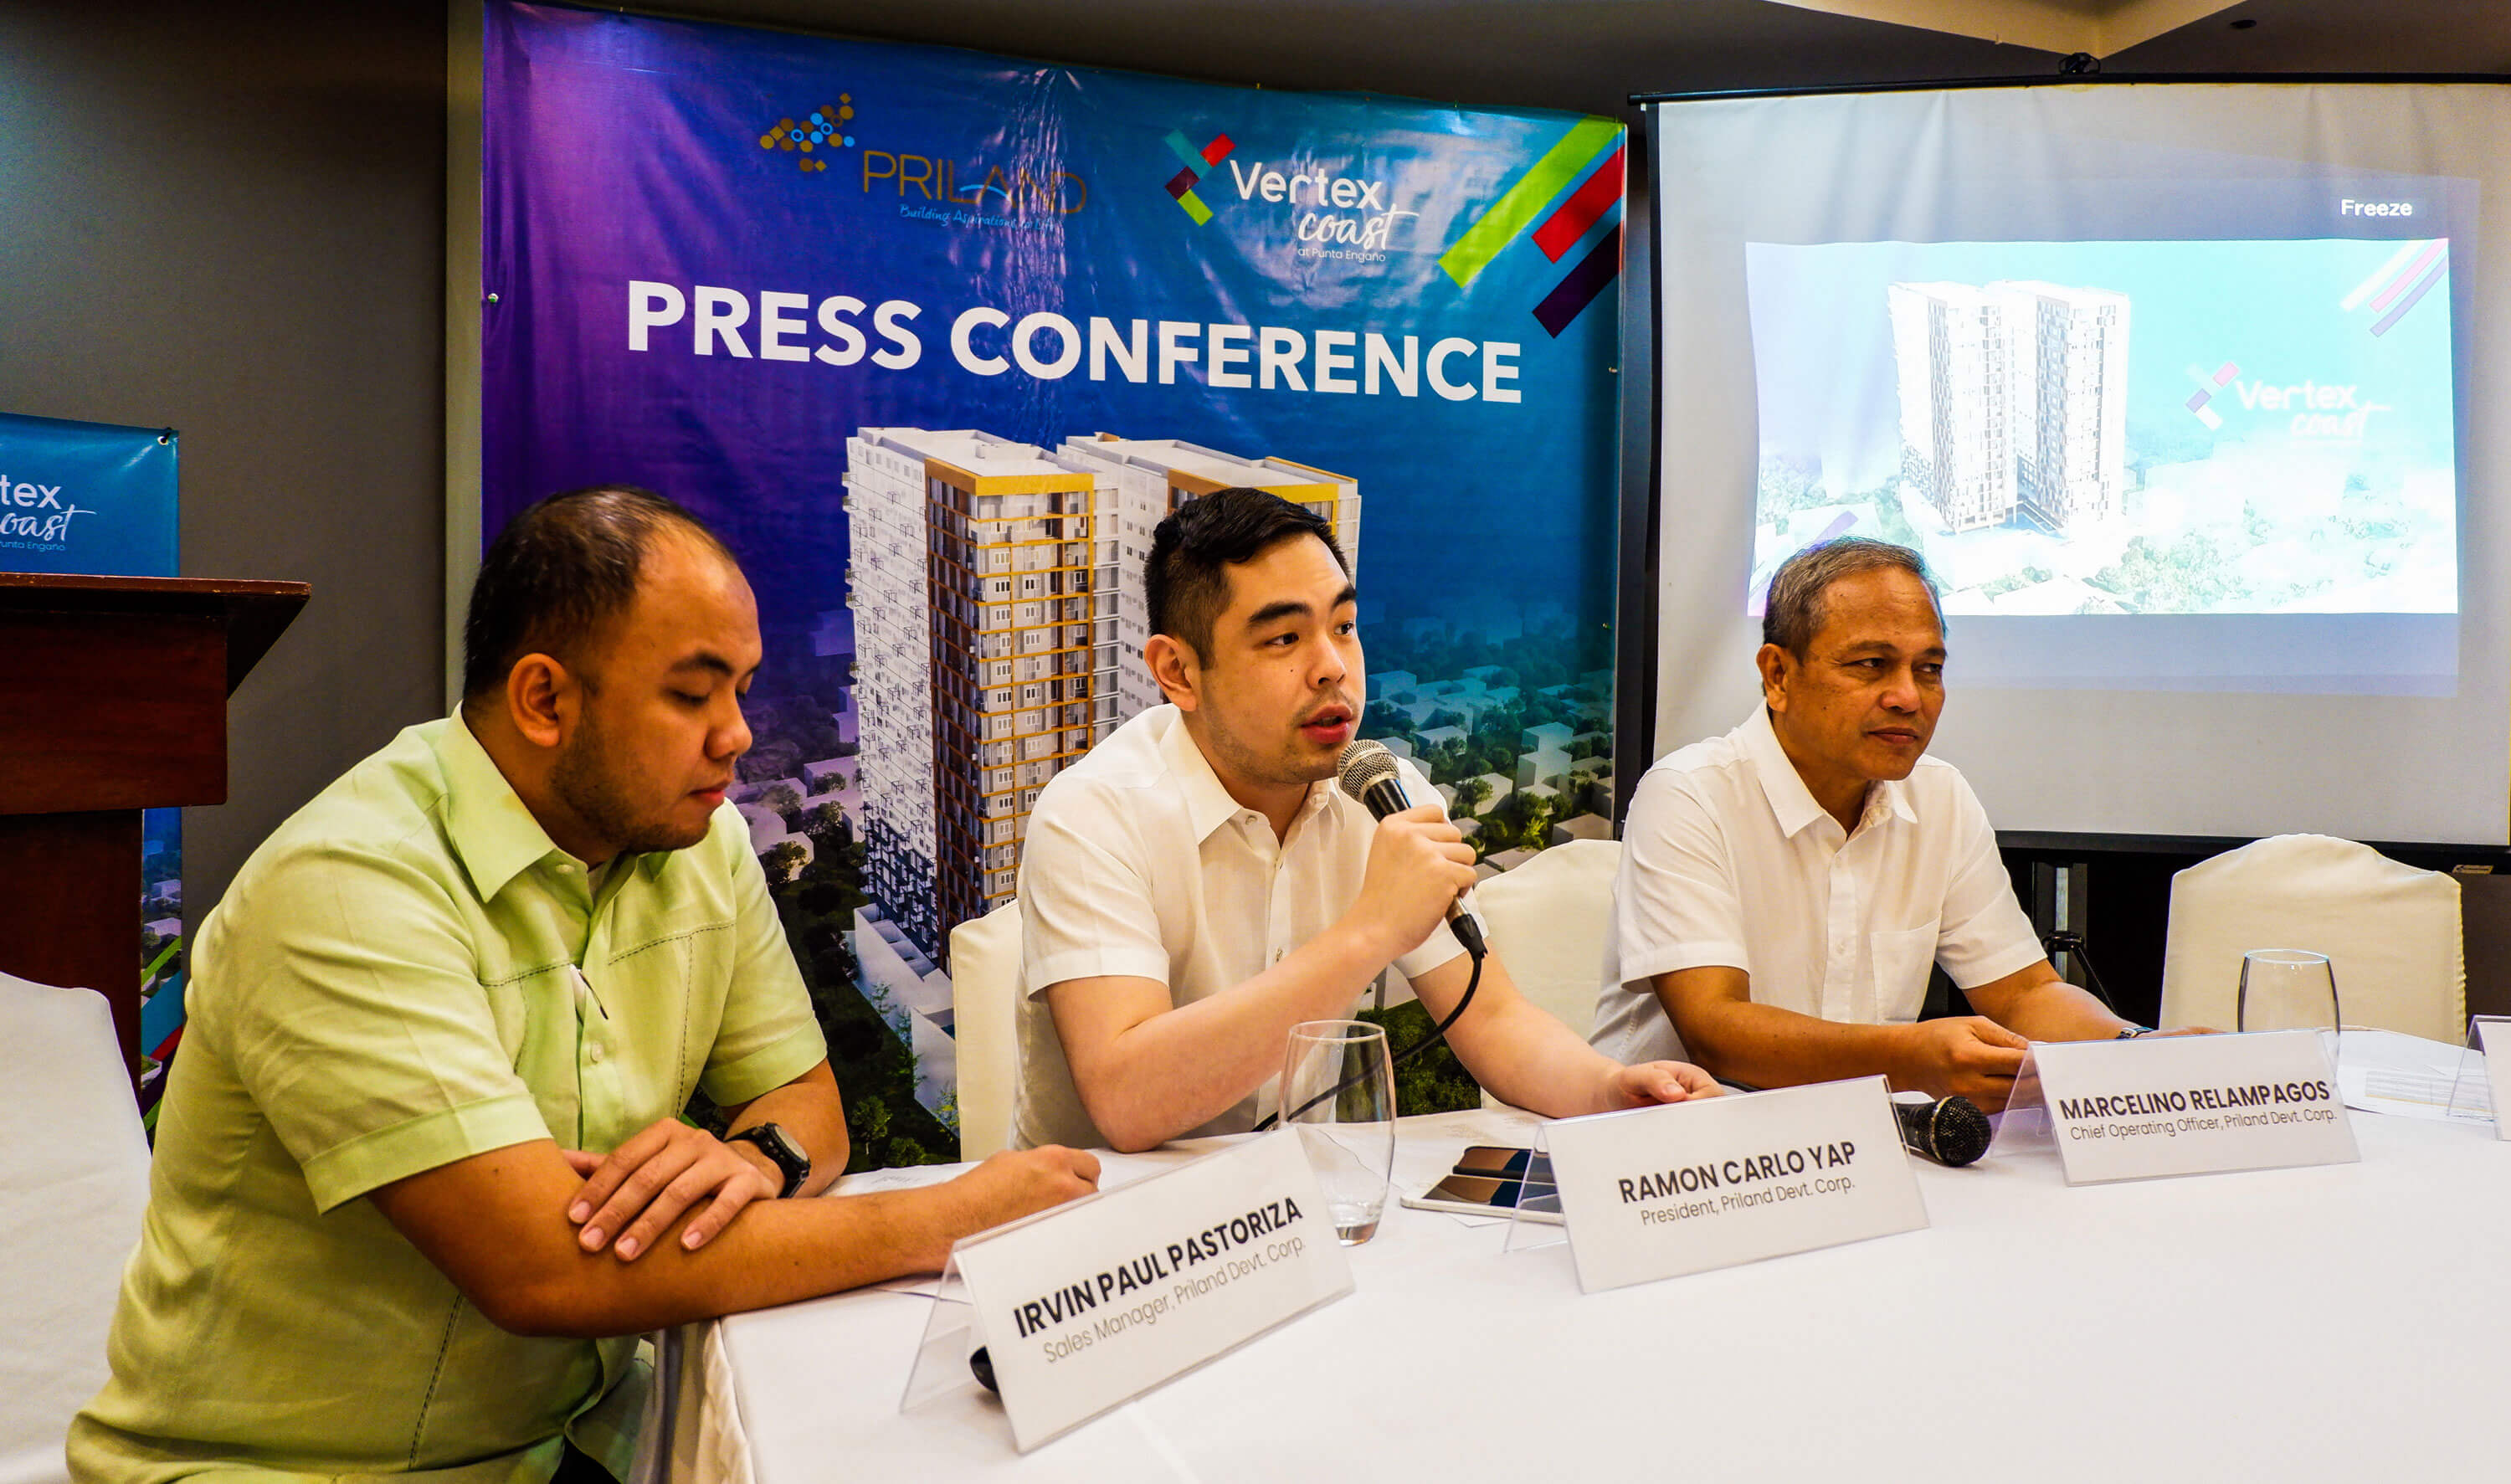 VERTEX COAST PRESS CONFERENCE. Priland President Ramon Carlo Yap (center) talks to reporters about Vertex Coast in Punta Engaño in Mactan. With him are Priland Sales Manager Irvin Paul Pastoriza (left) and Priland Chief Operating Officer Marcelino Relampagos.